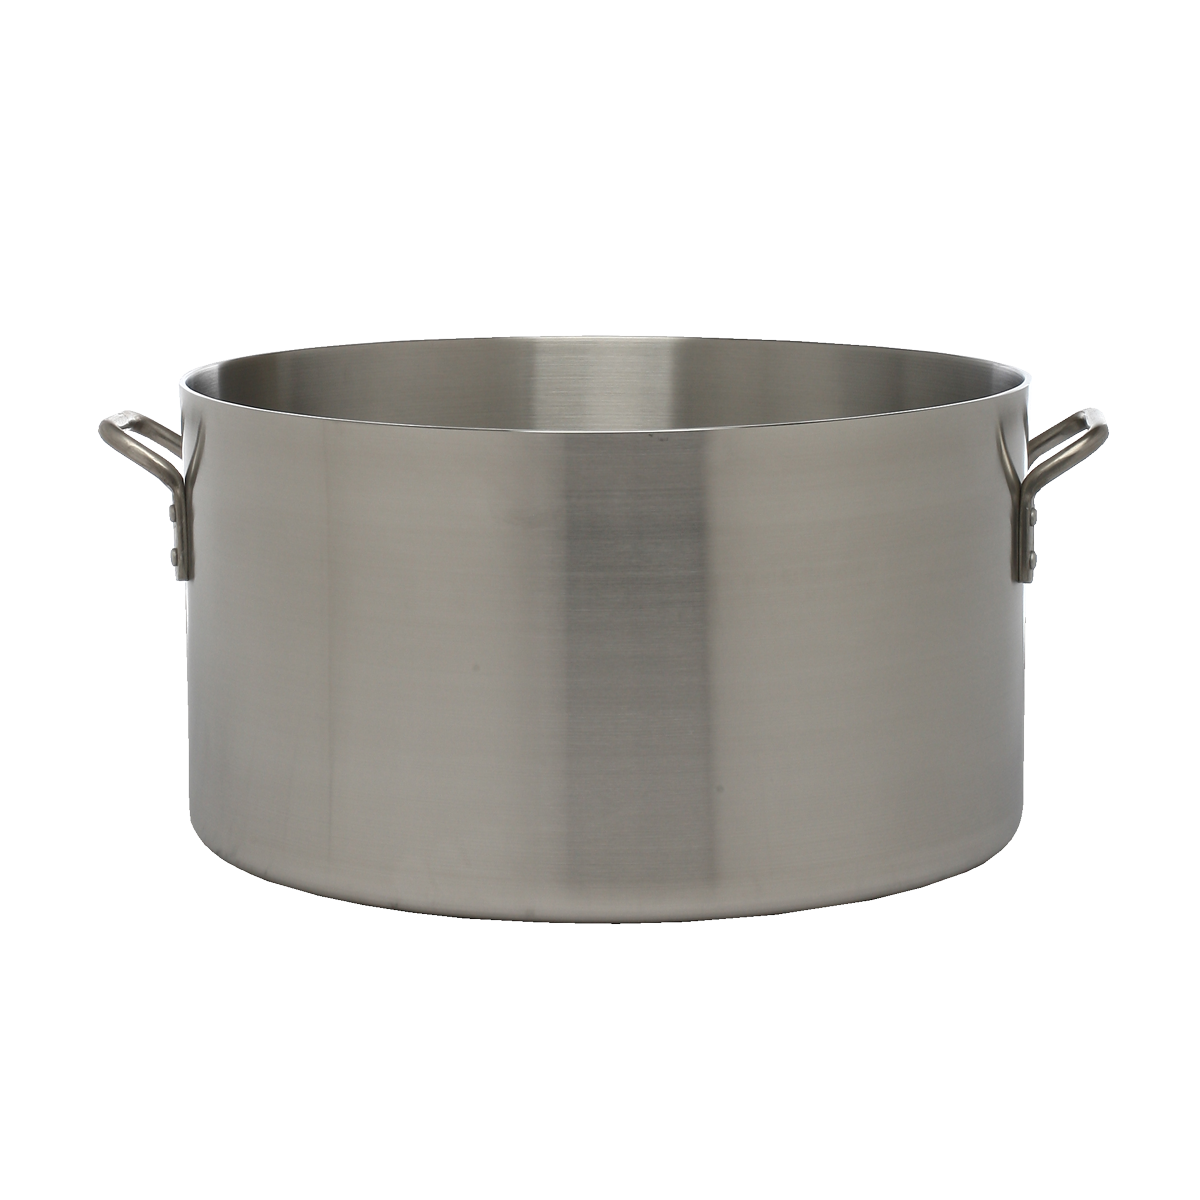 Steel Cooking Pan PNG HD Quality